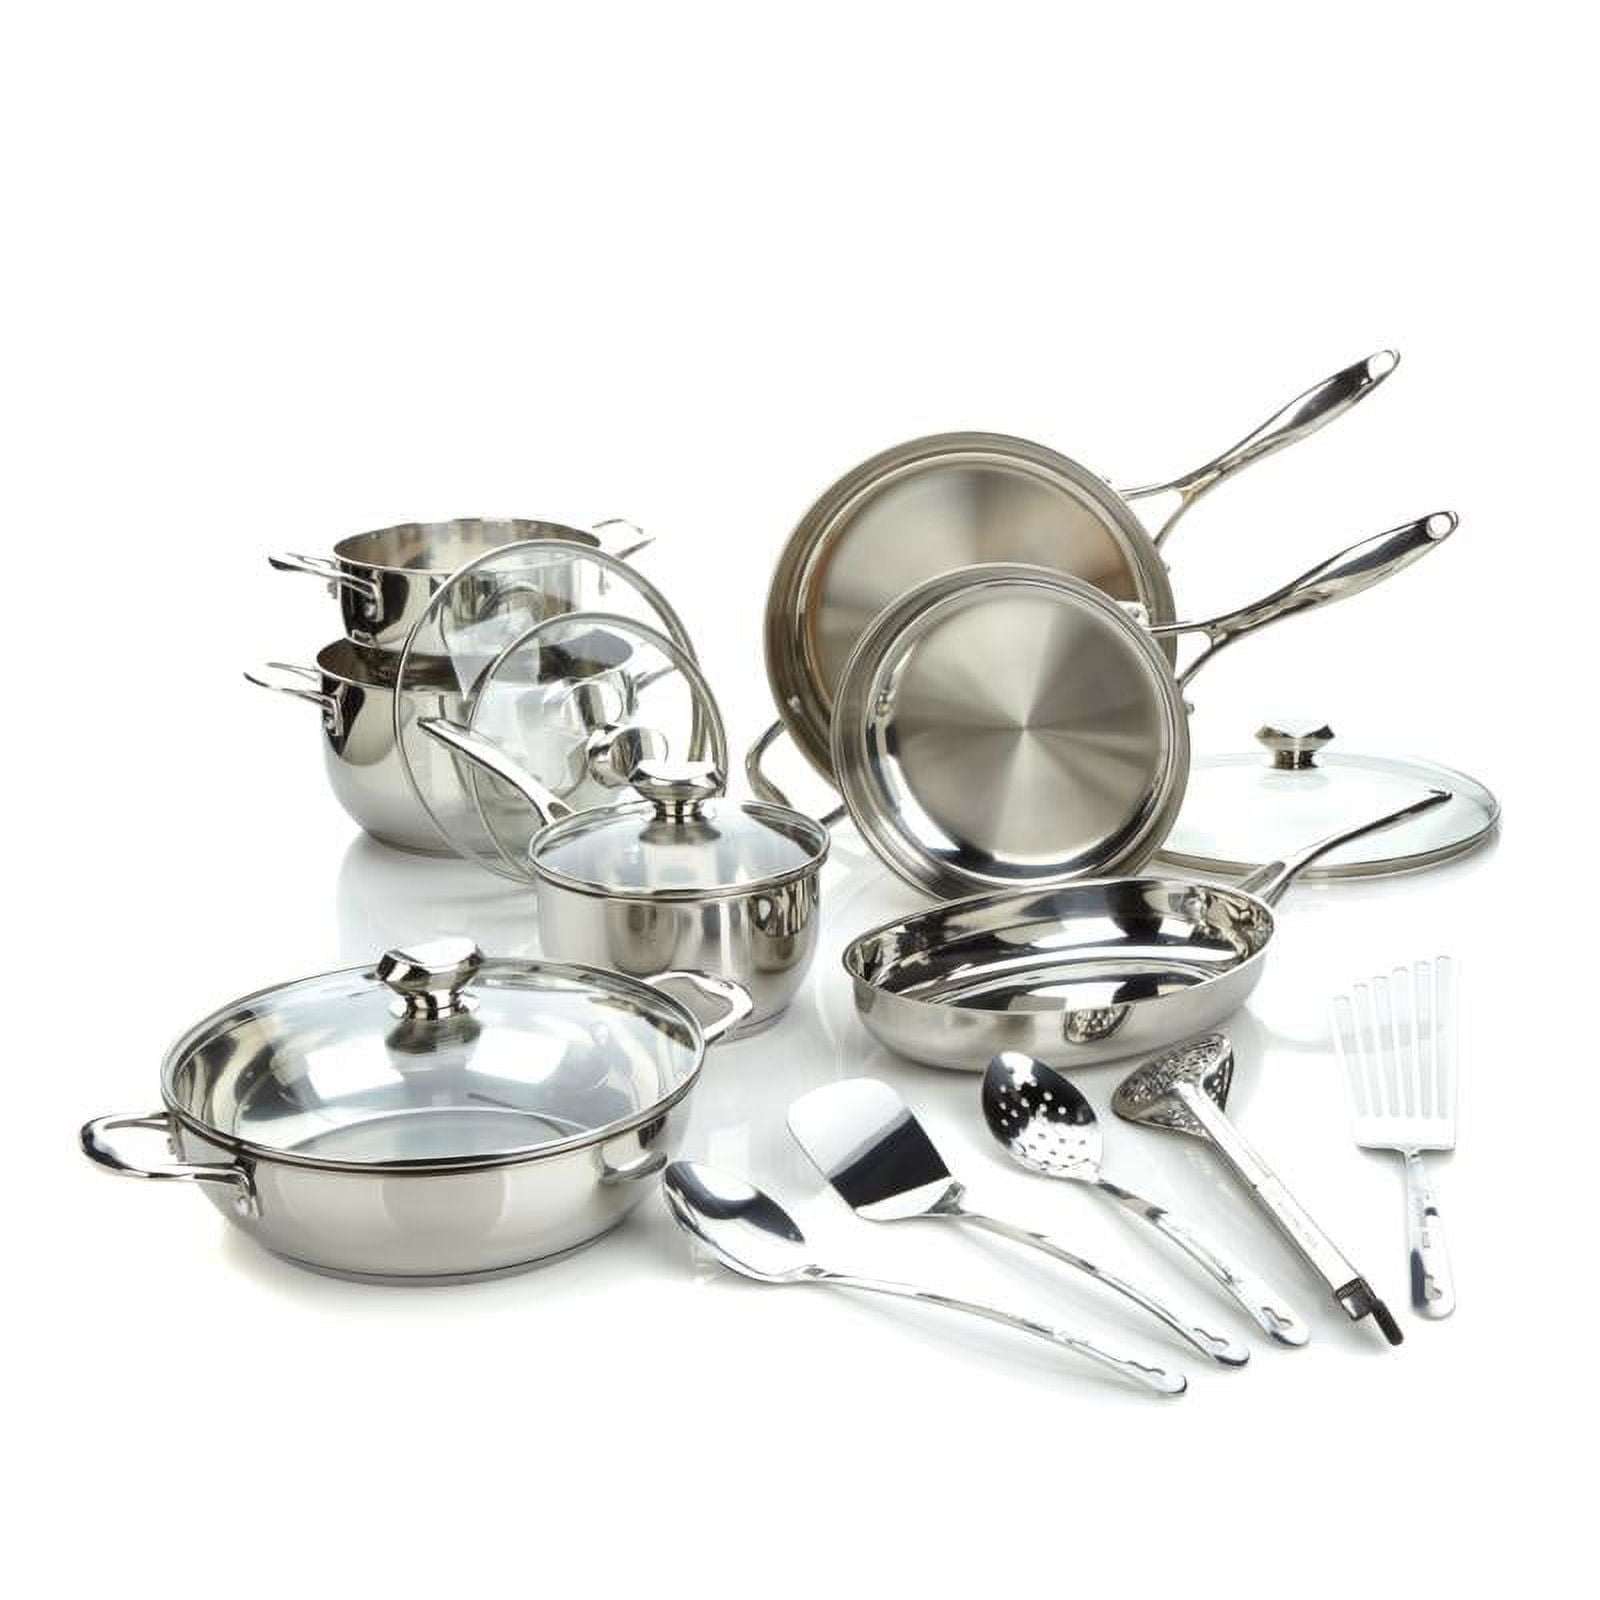 Wolfgang Puck Bistro Elite Stainless Steel Cookware Set 19pcs for